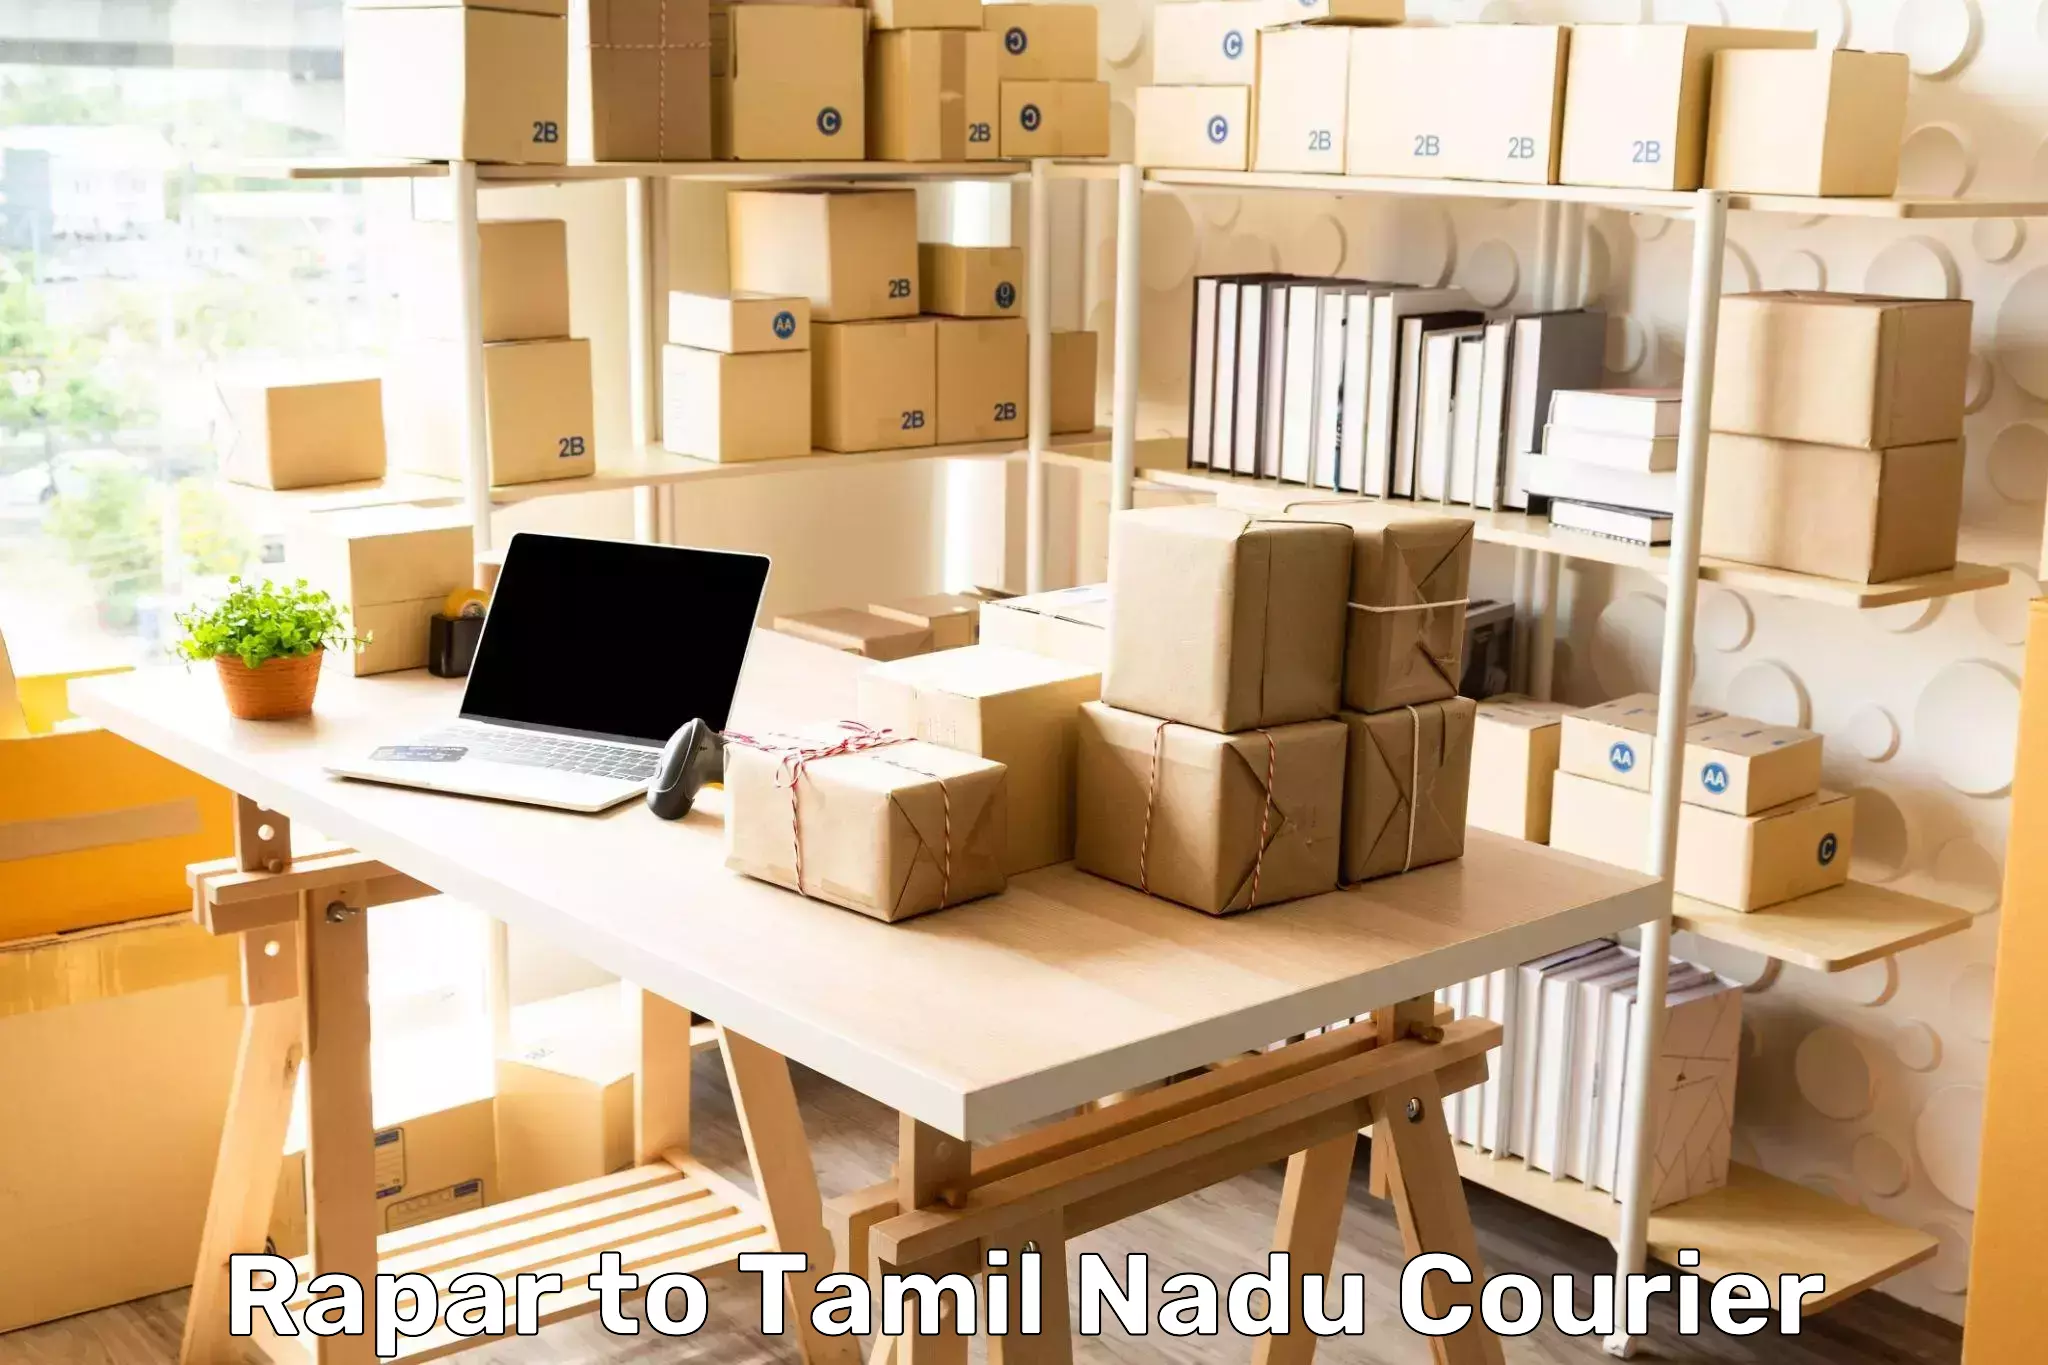 Nationwide courier service Rapar to Ennore Port Chennai